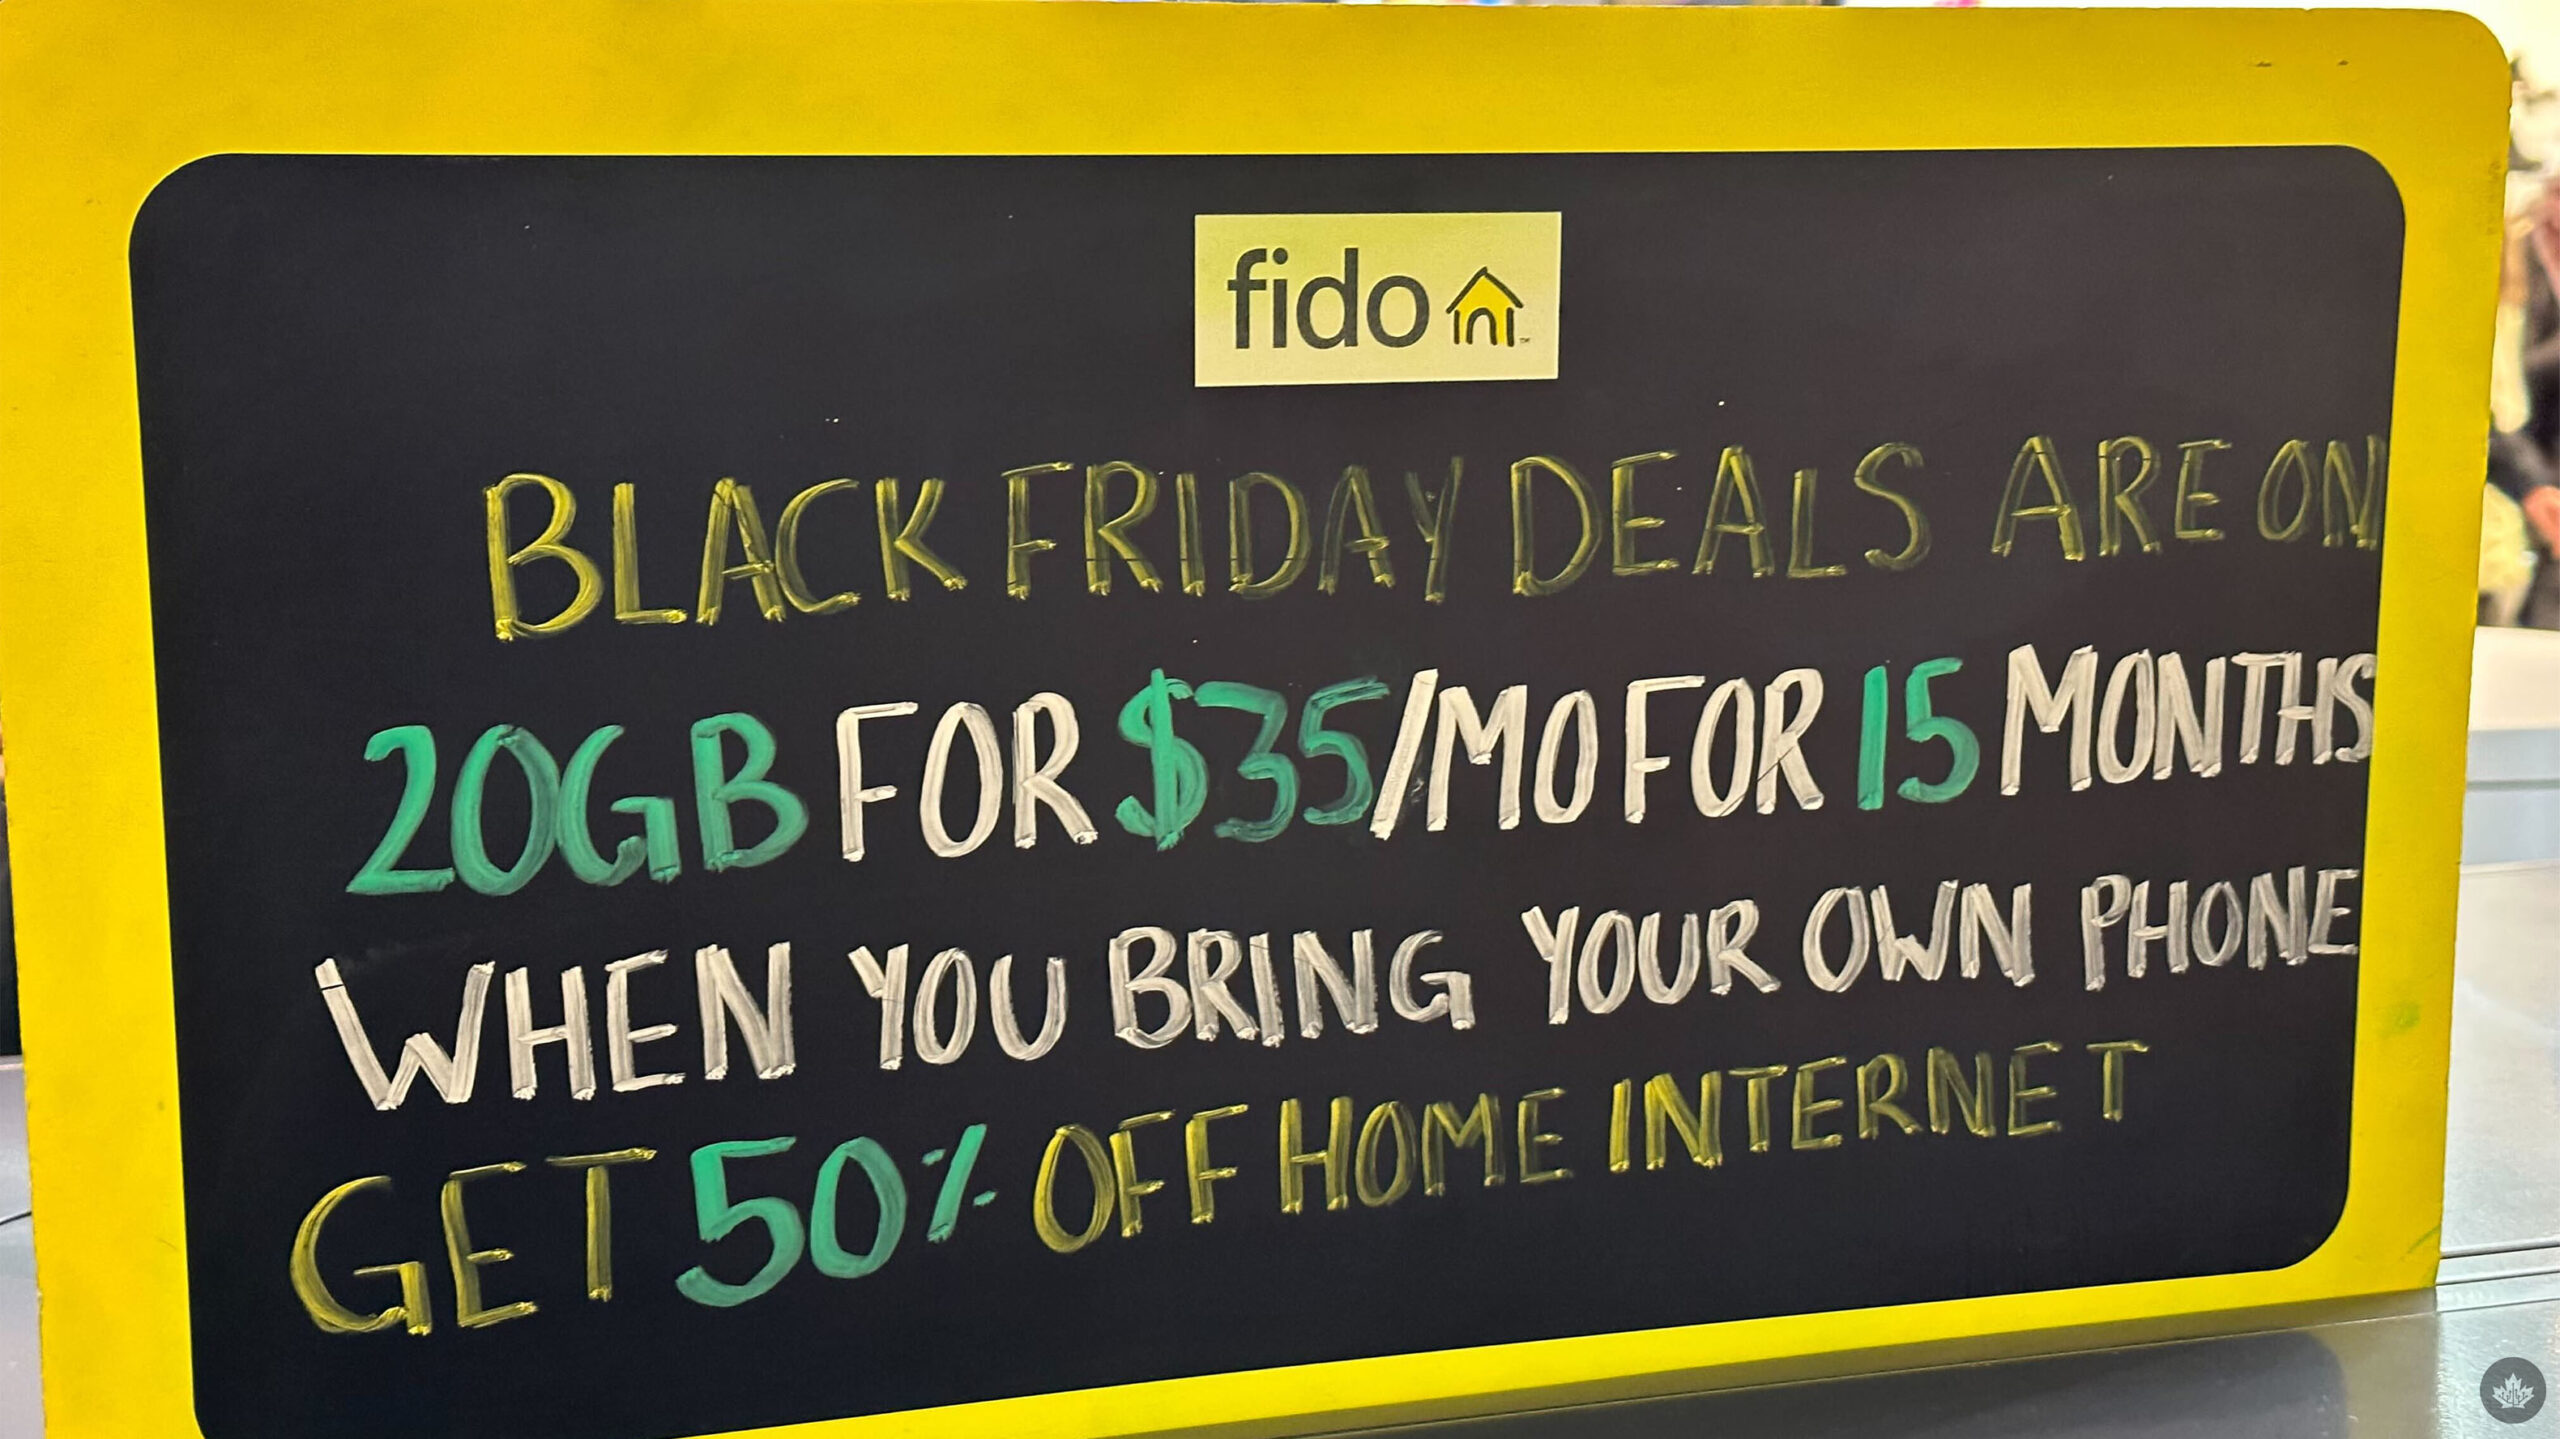 In-store Black Friday carrier deals are getting even better